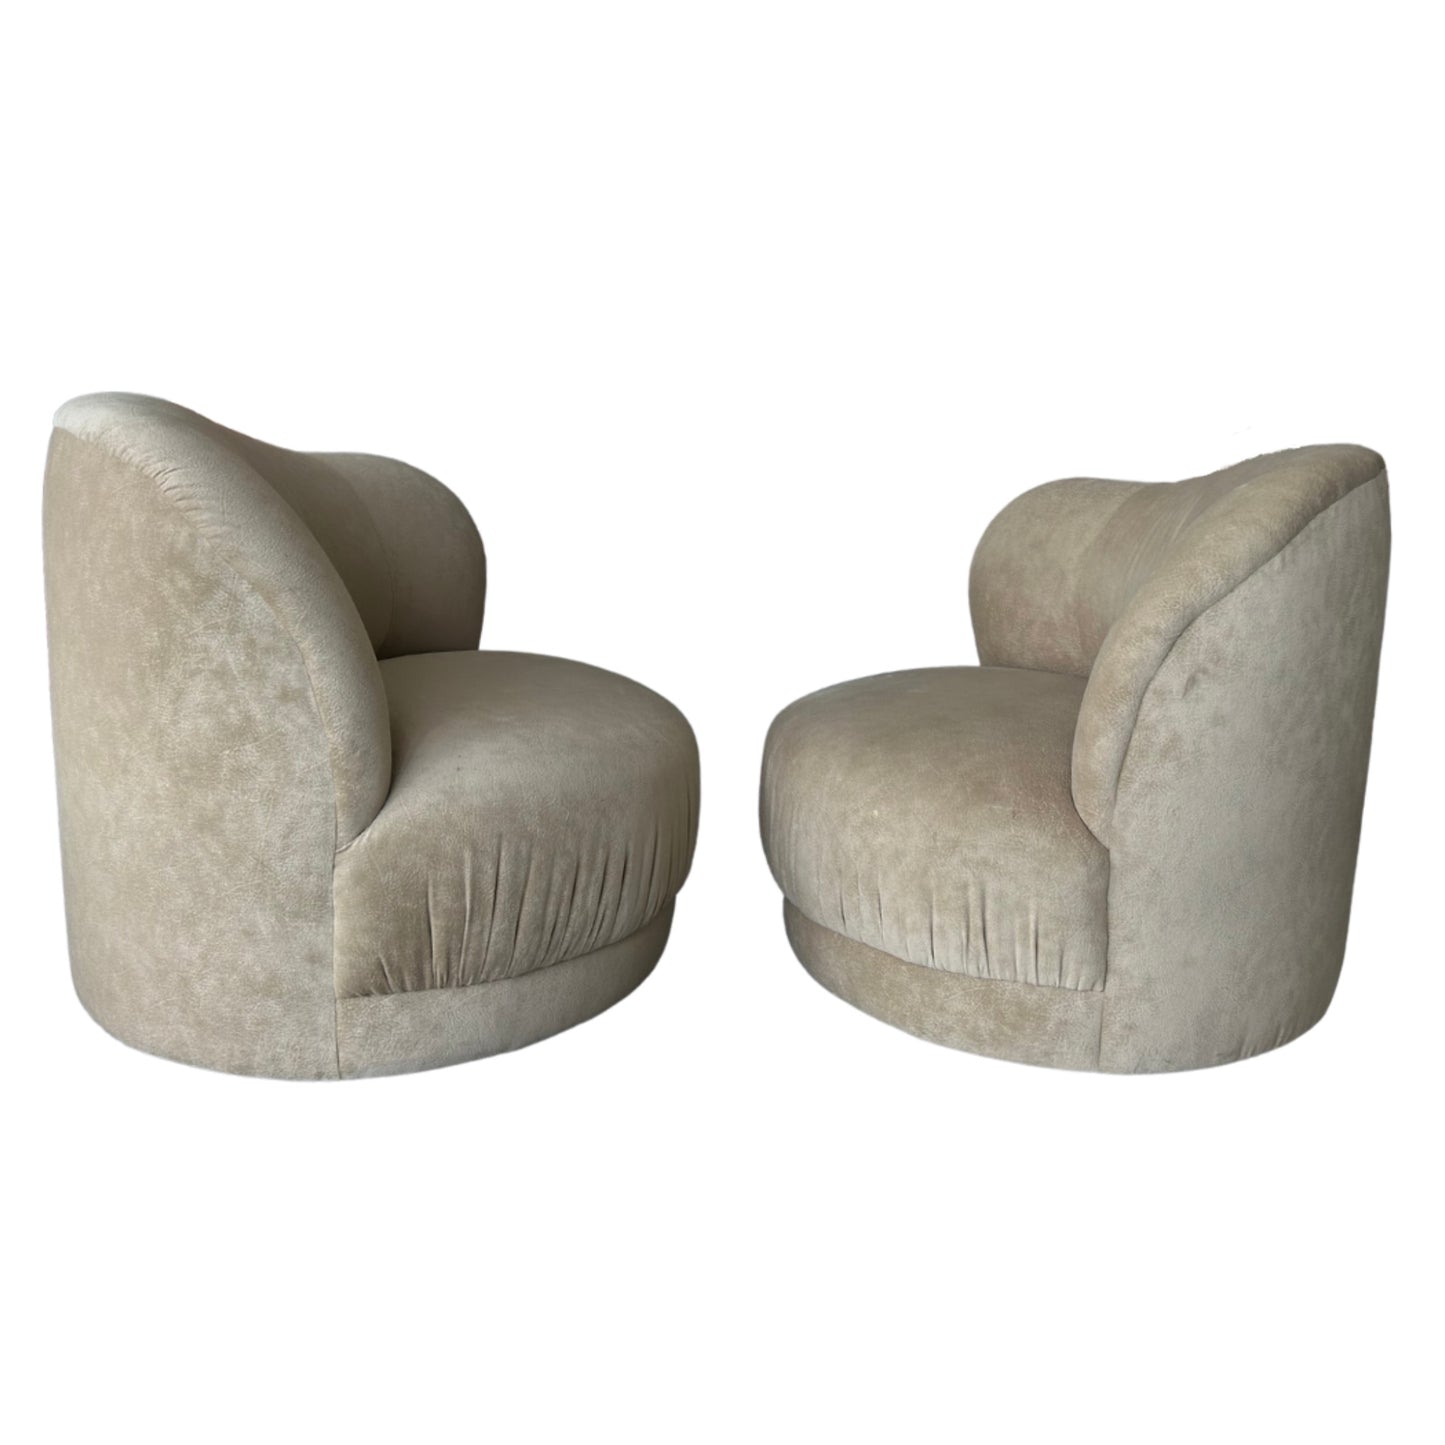 Pair of Faux Suede Swivel Chairs